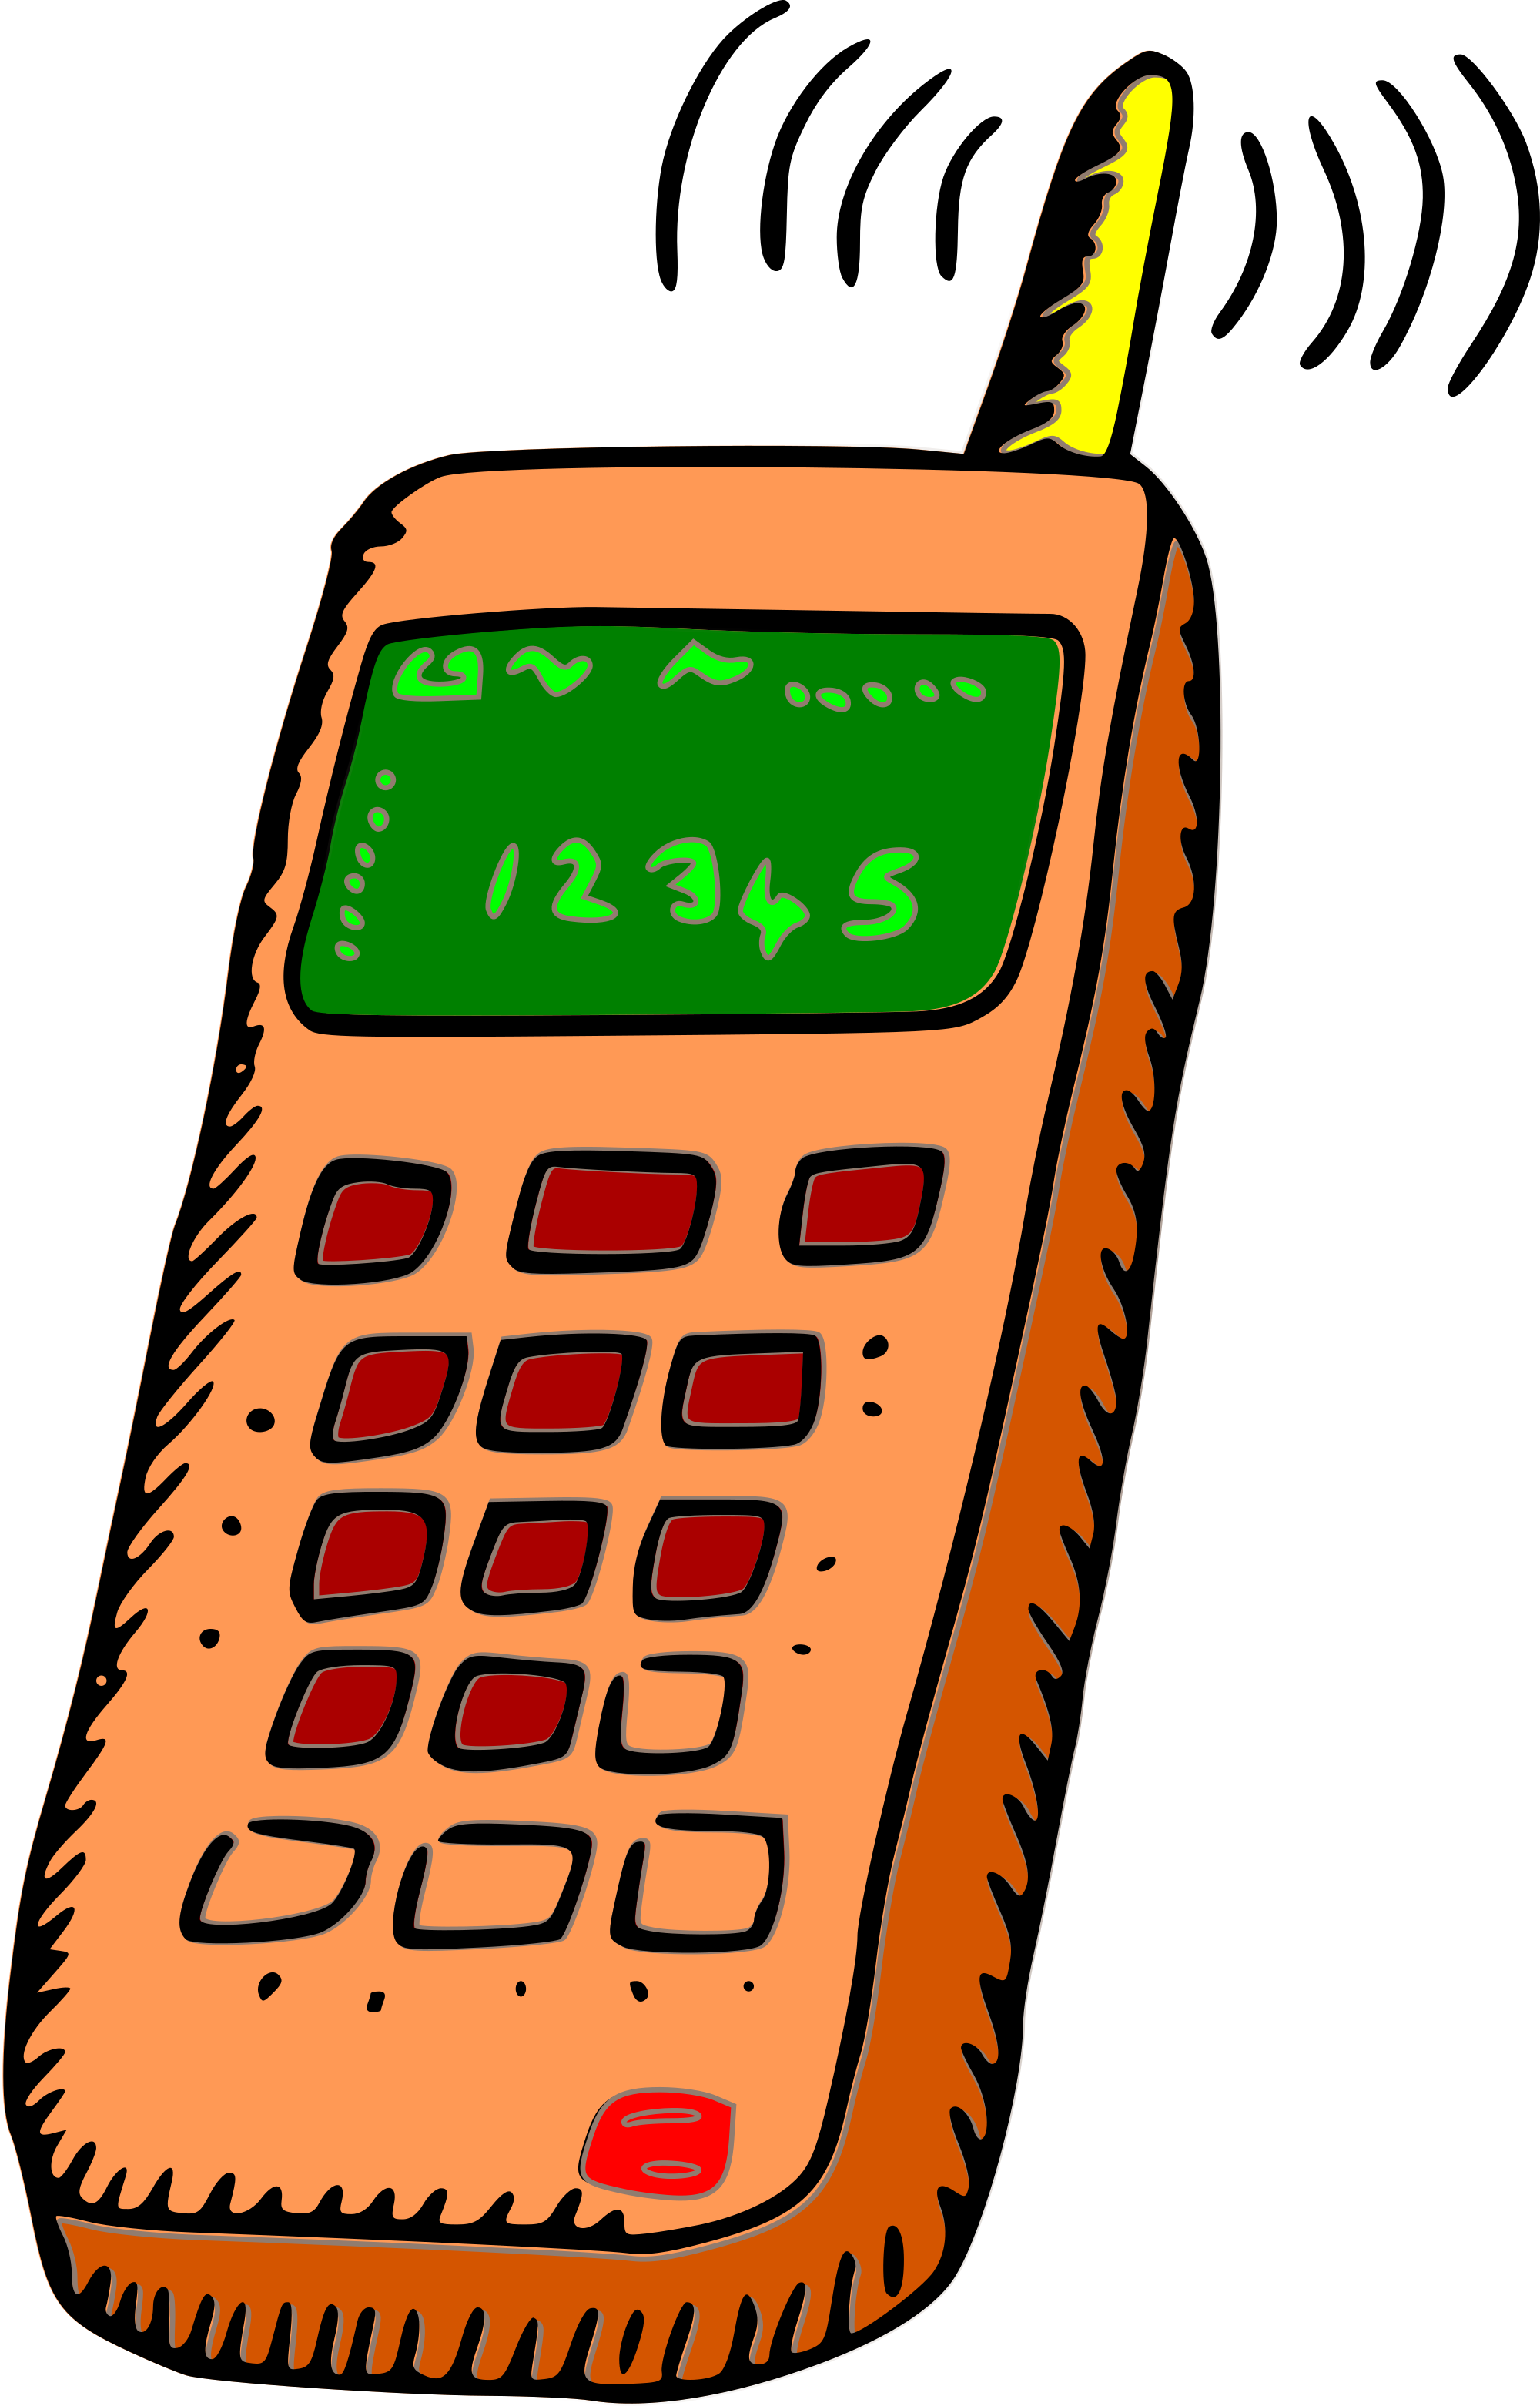 Cell phone ringing clipart free clipart images 2 cliparting